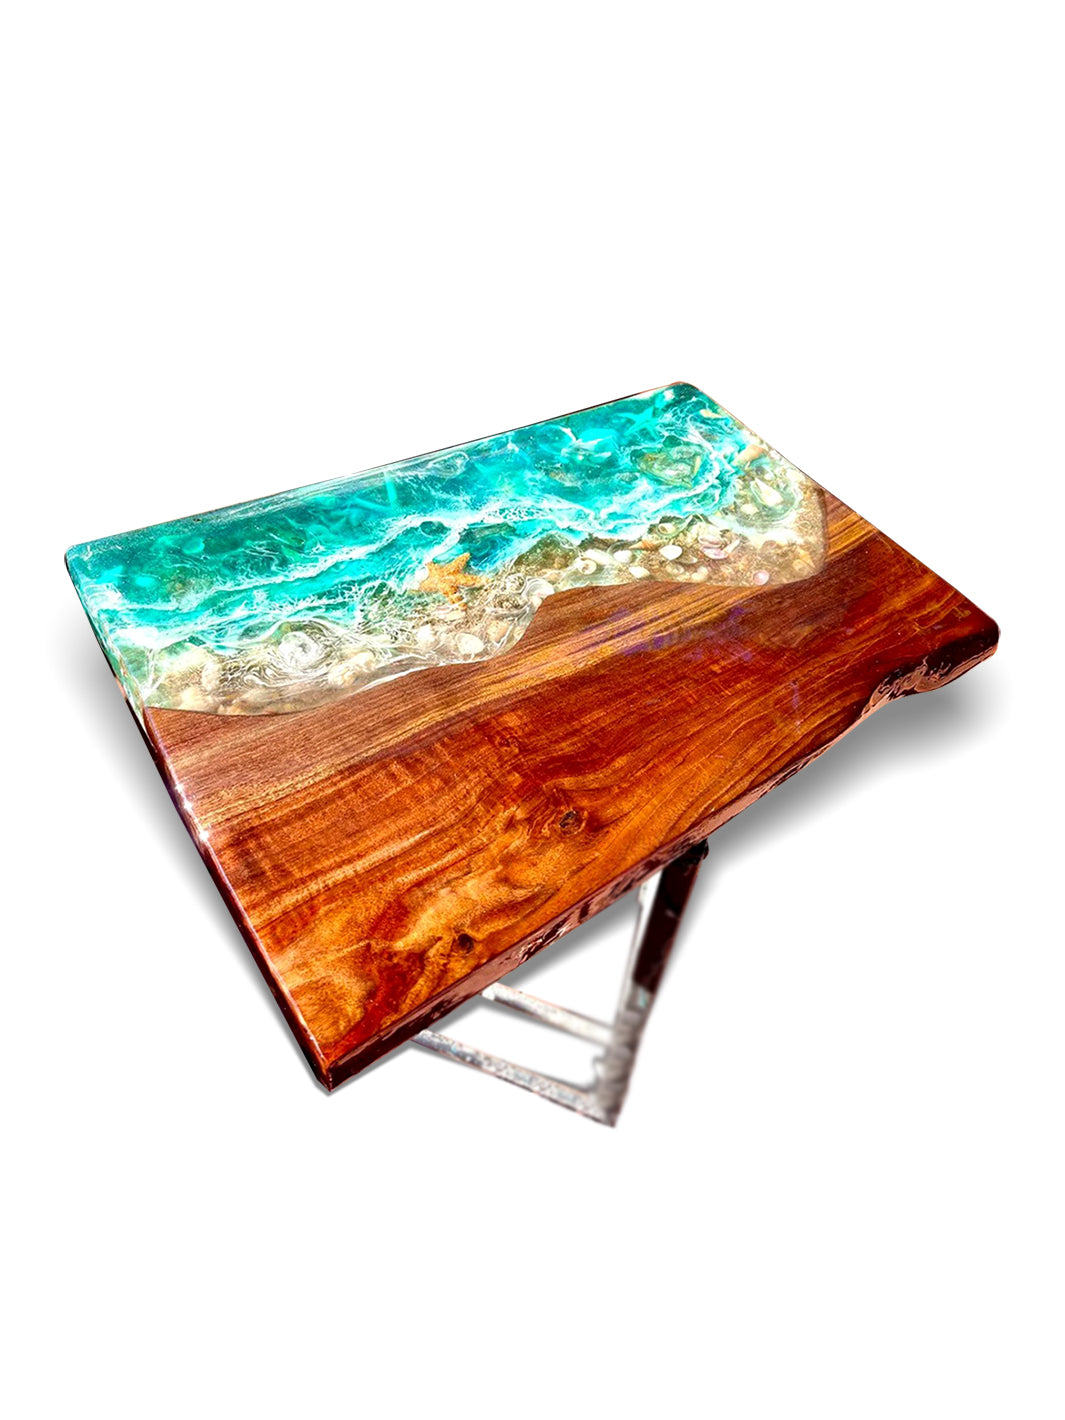 Handcrafted Walnut Epoxy Resin Dining / Office Table Artsheedal Kitchen & Dining Room Tables ART0219